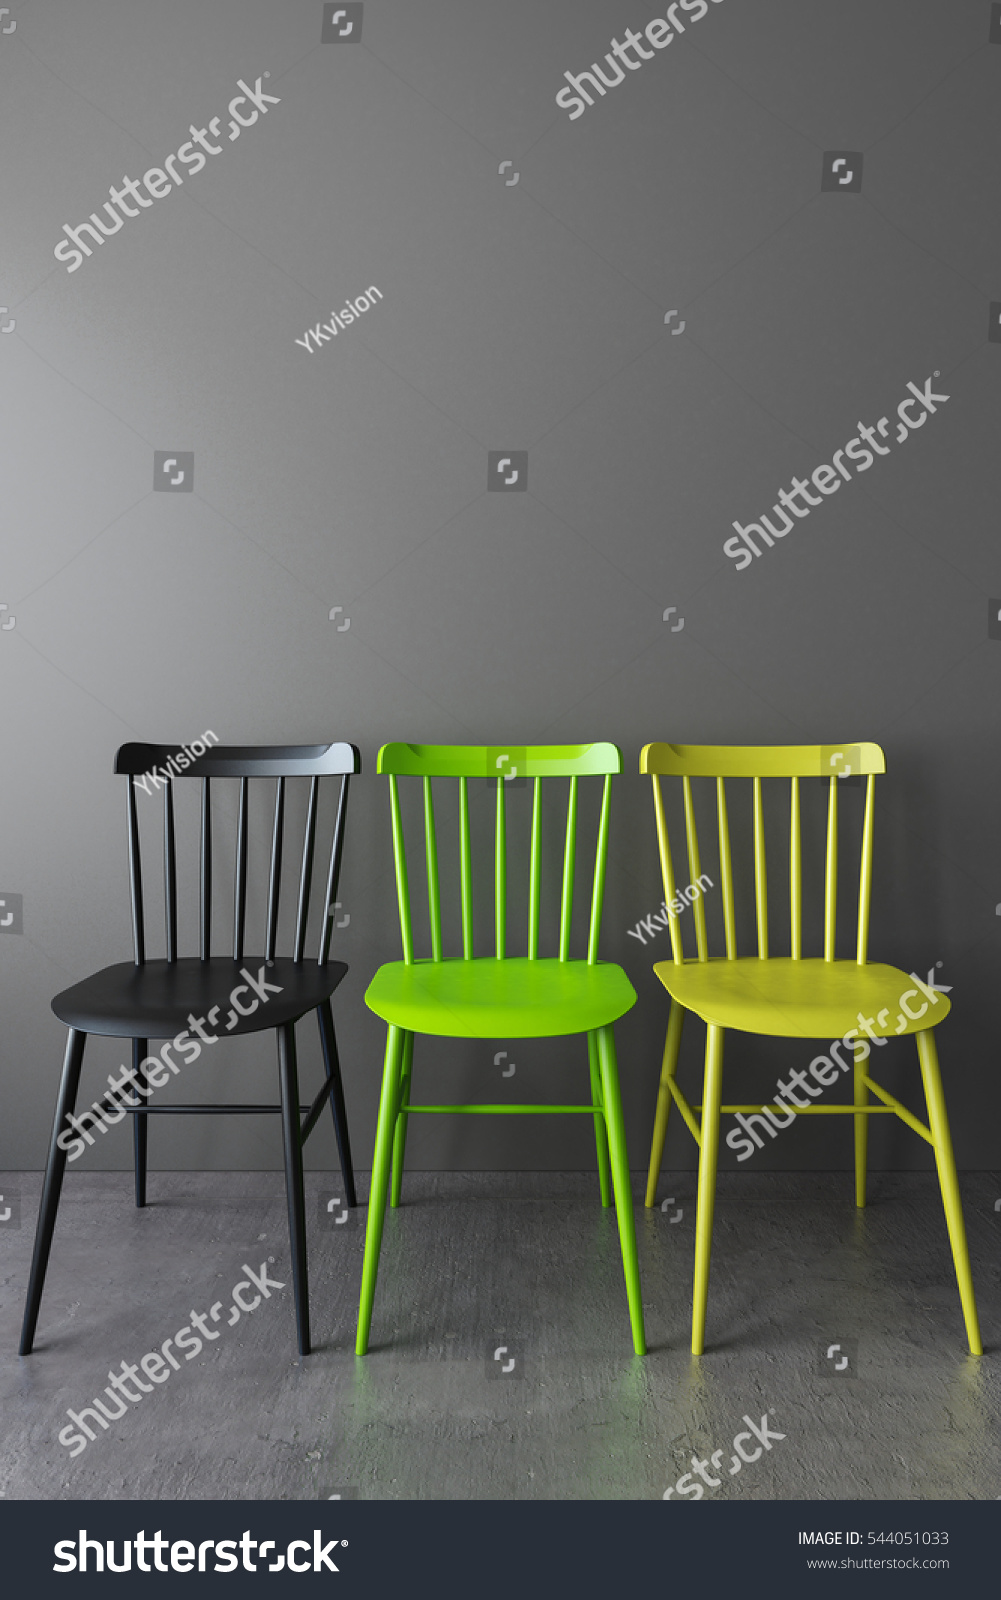 Three simple chair in empty room with gray walls and a concrete floor. Mock up interior illustration 3d render. #544051033